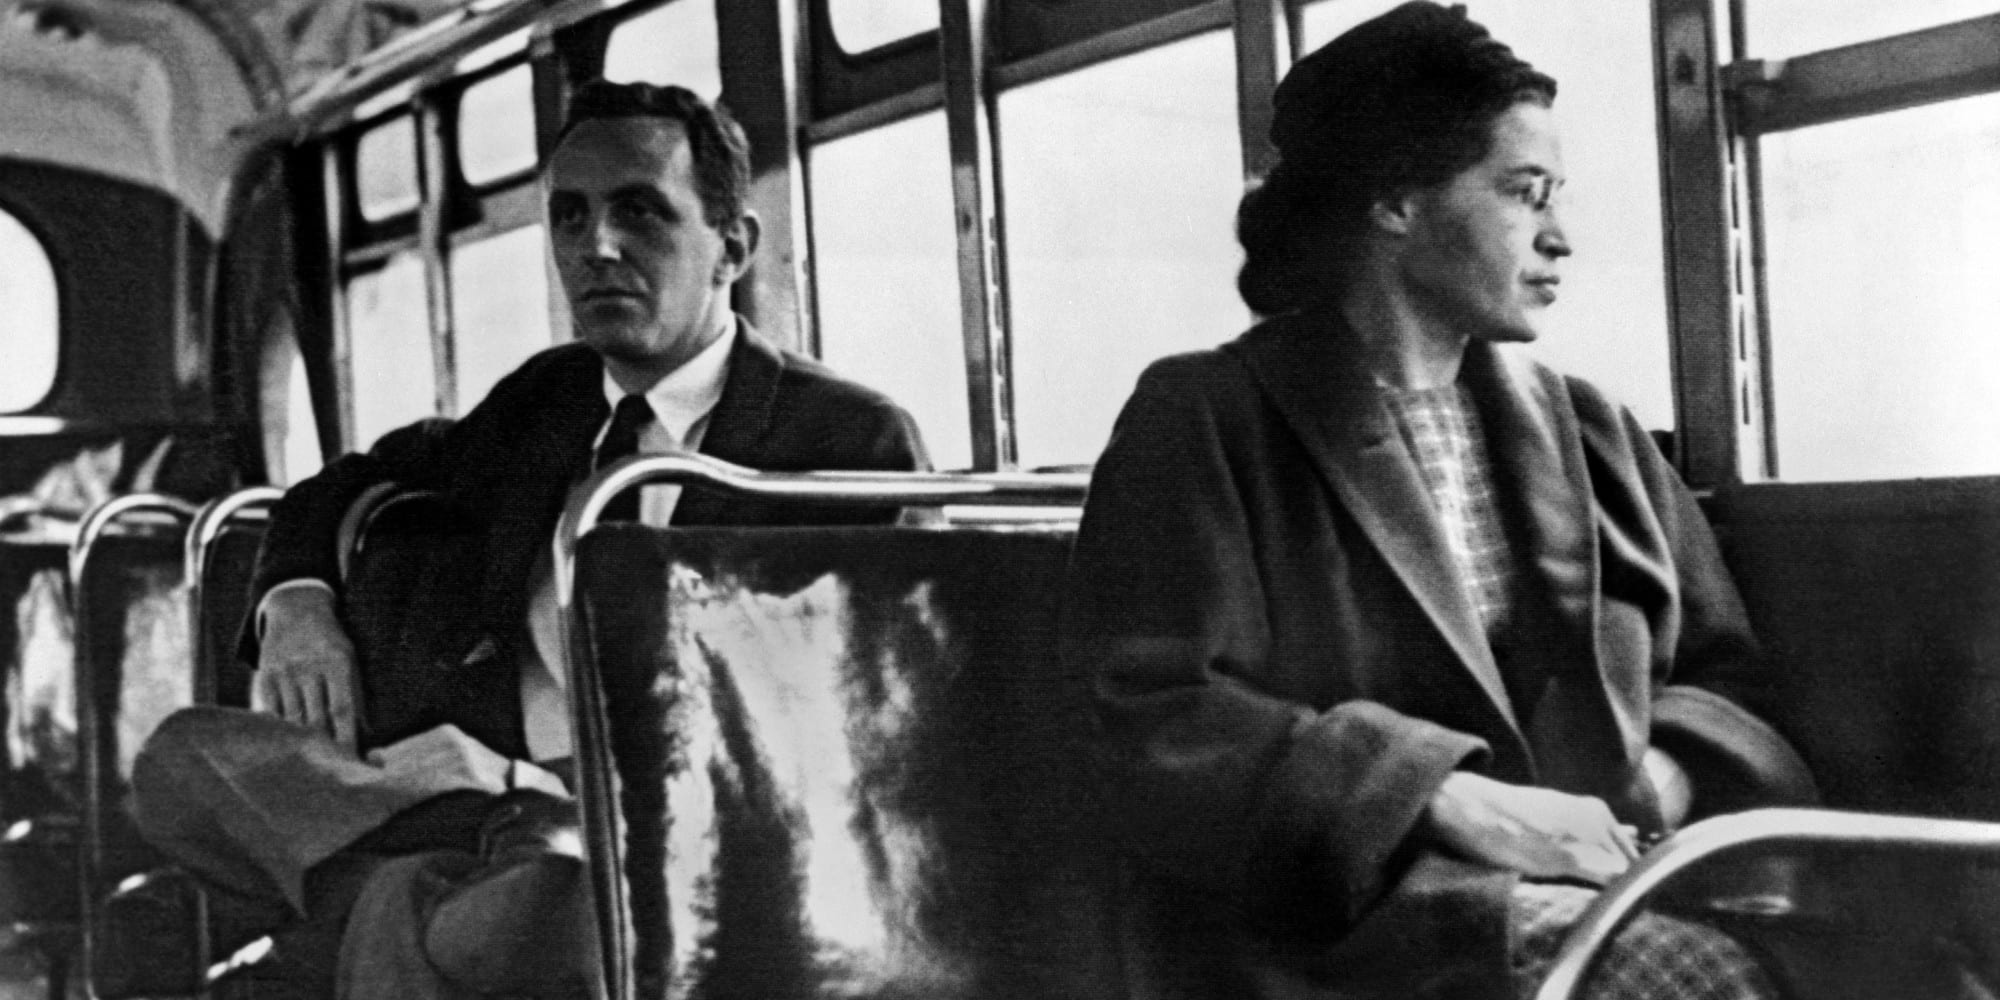 Rosa Parks seated toward the front of the bus, Montgomery, Alabama, 1956. (Photo by Underwood Archives/Getty Images)